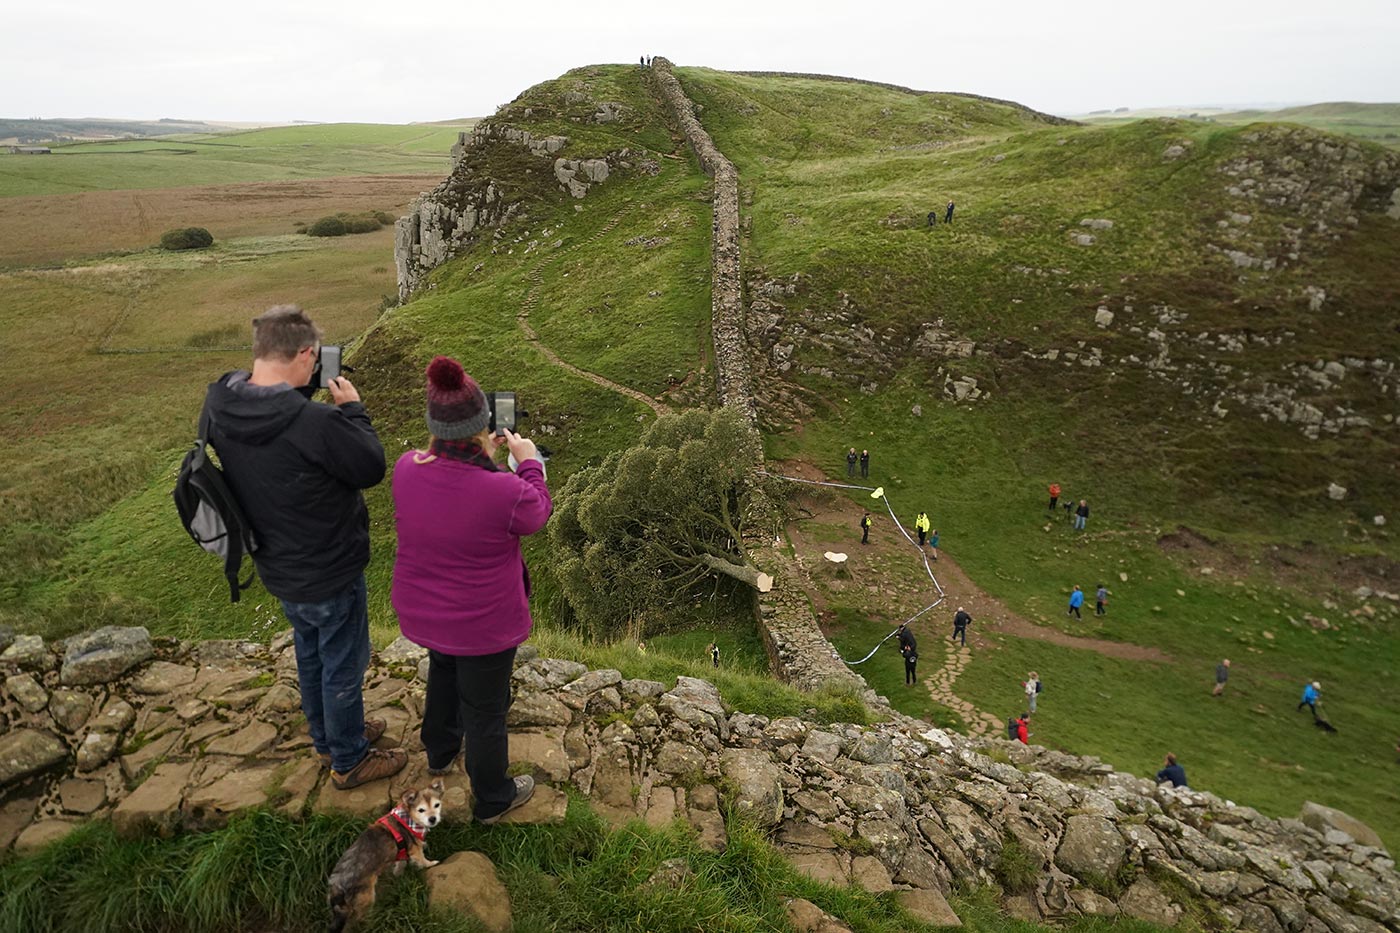 Members of the public take photos of the tree at Sycamore Gap